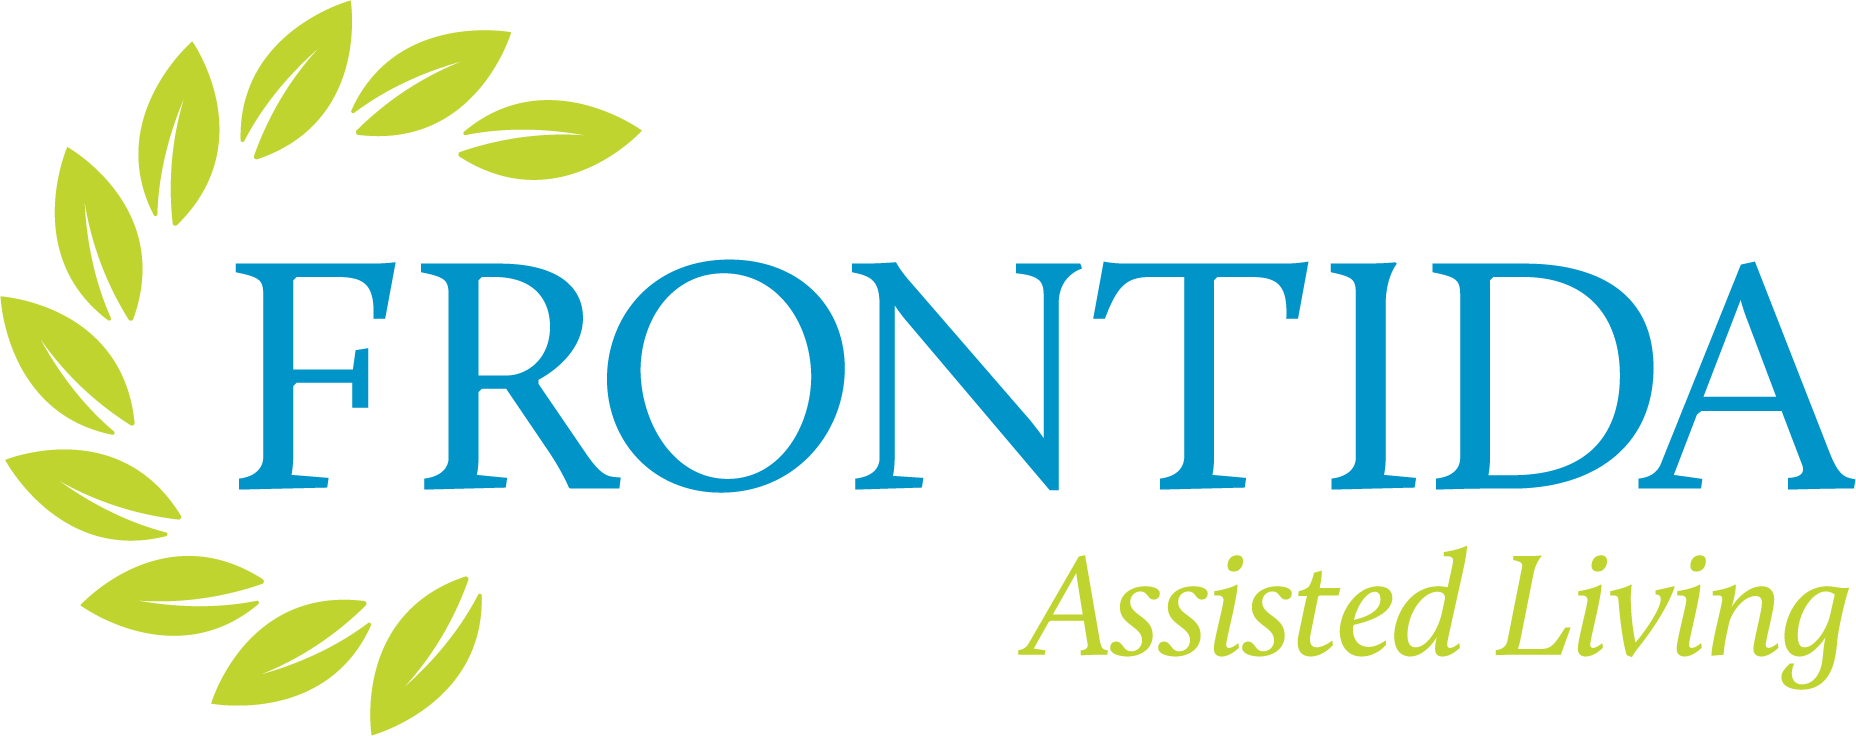 Frontida Assisted Living logo